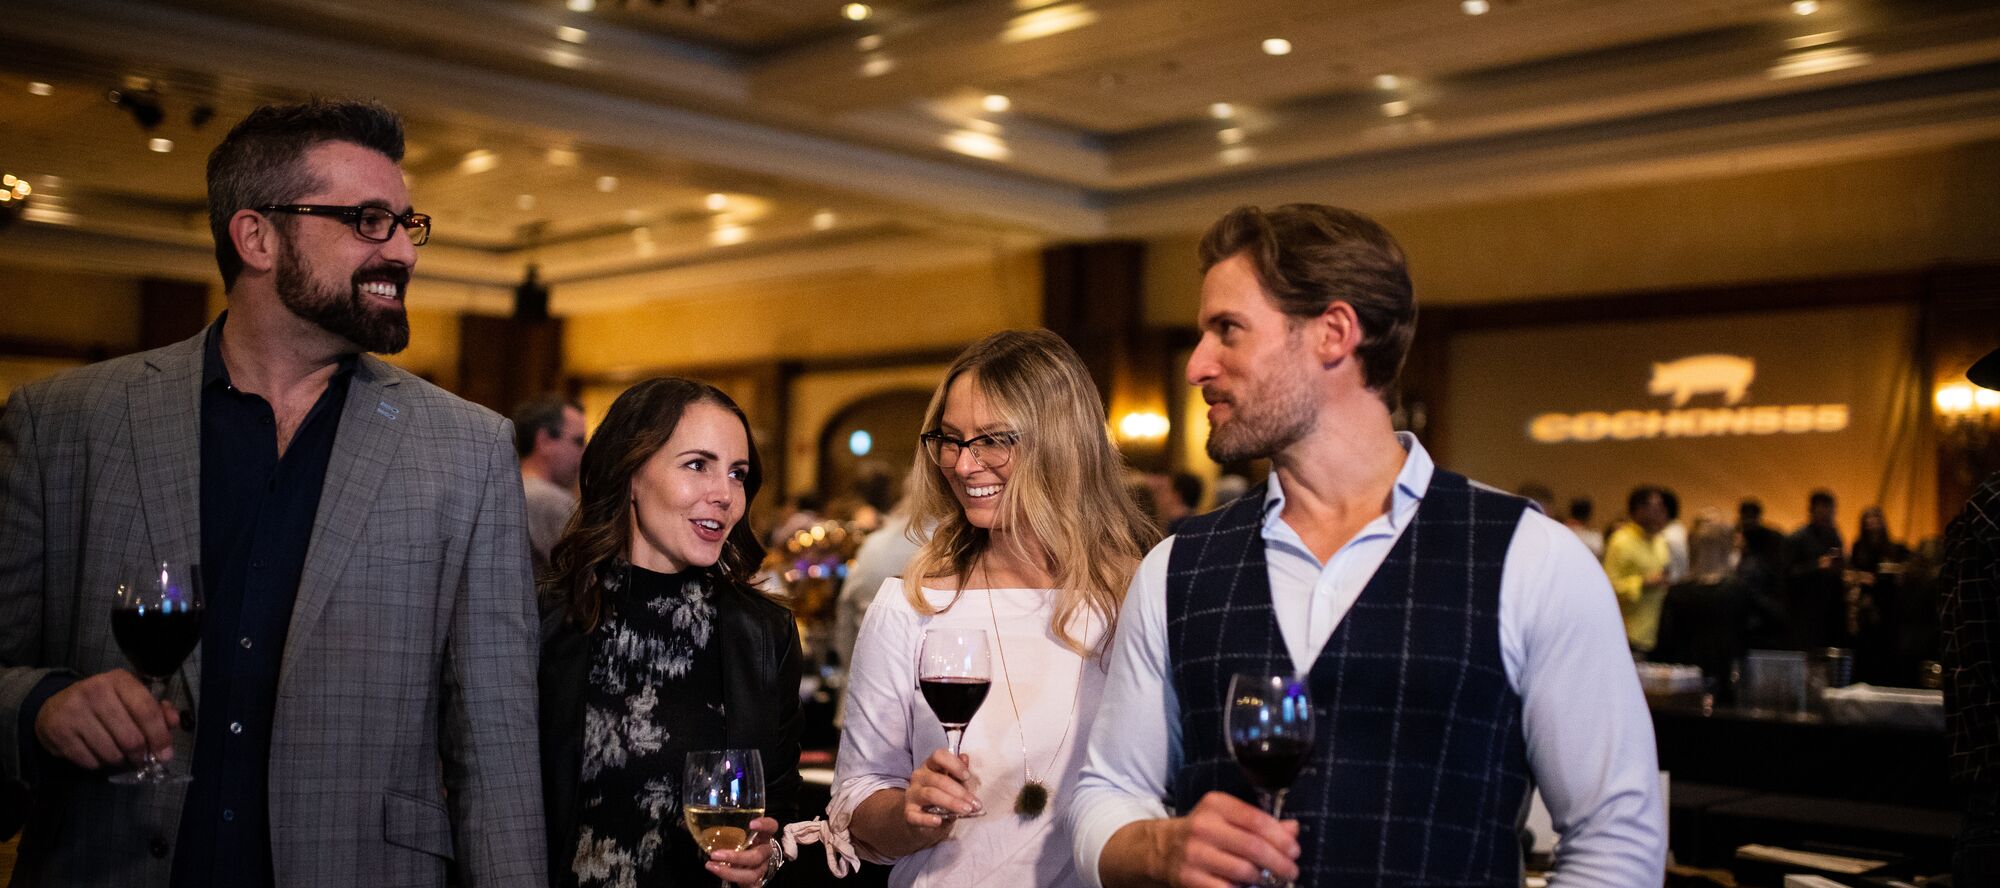 The guests are enjoying a glass of wine while meeting friends at Fairmont Banff Springs.